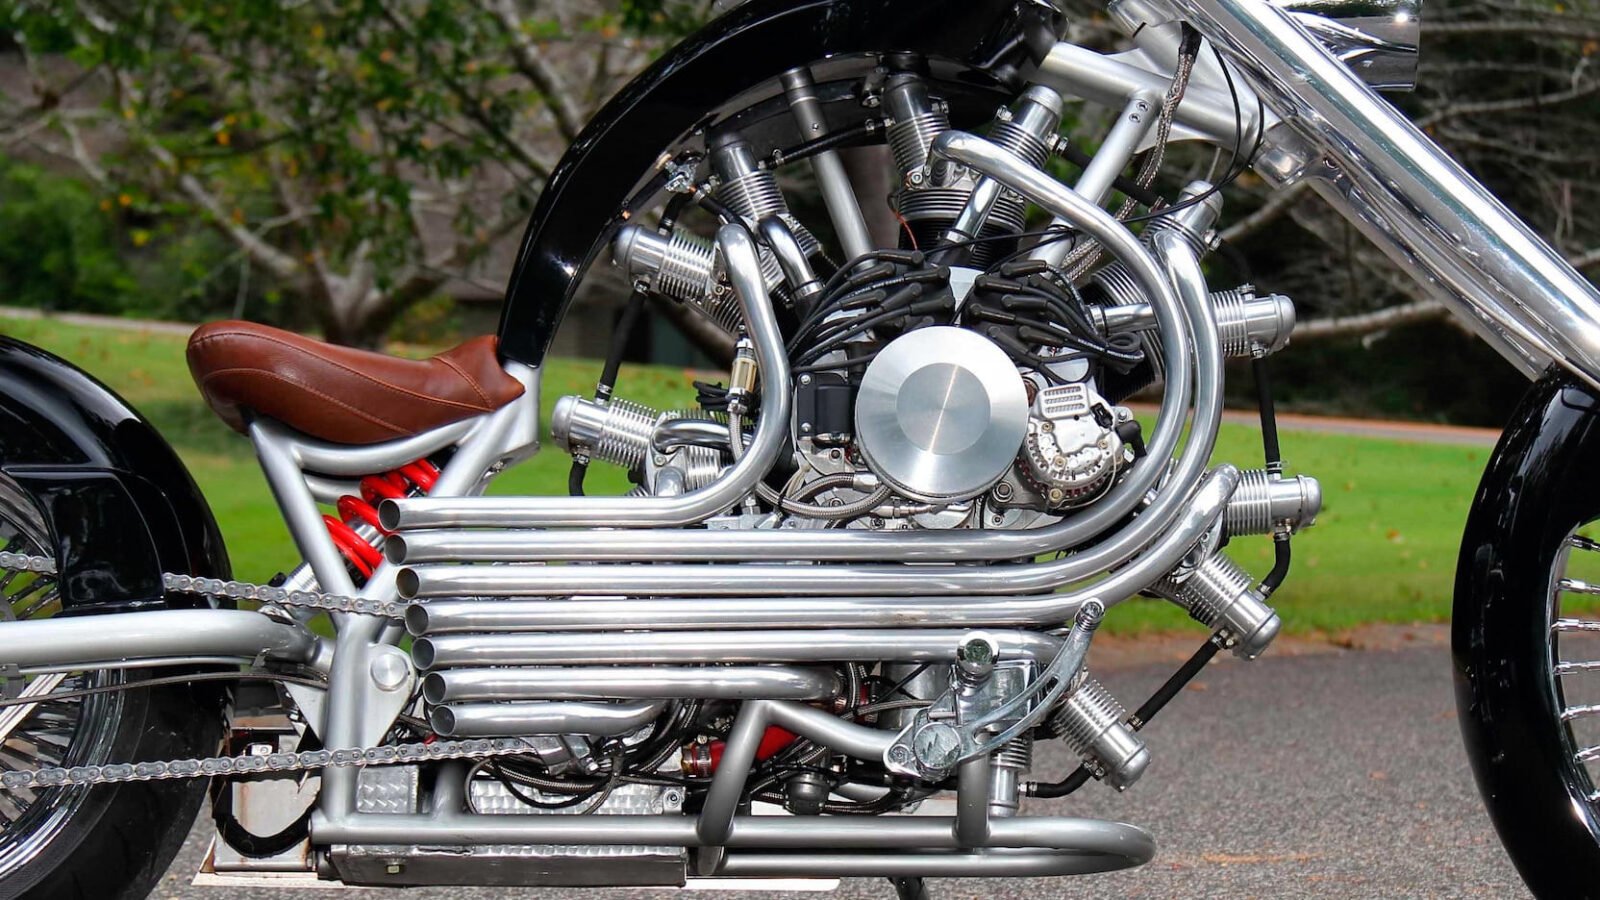 JRL Cycles Lucky 7 – A Radial Engine Production Motorcycle 5